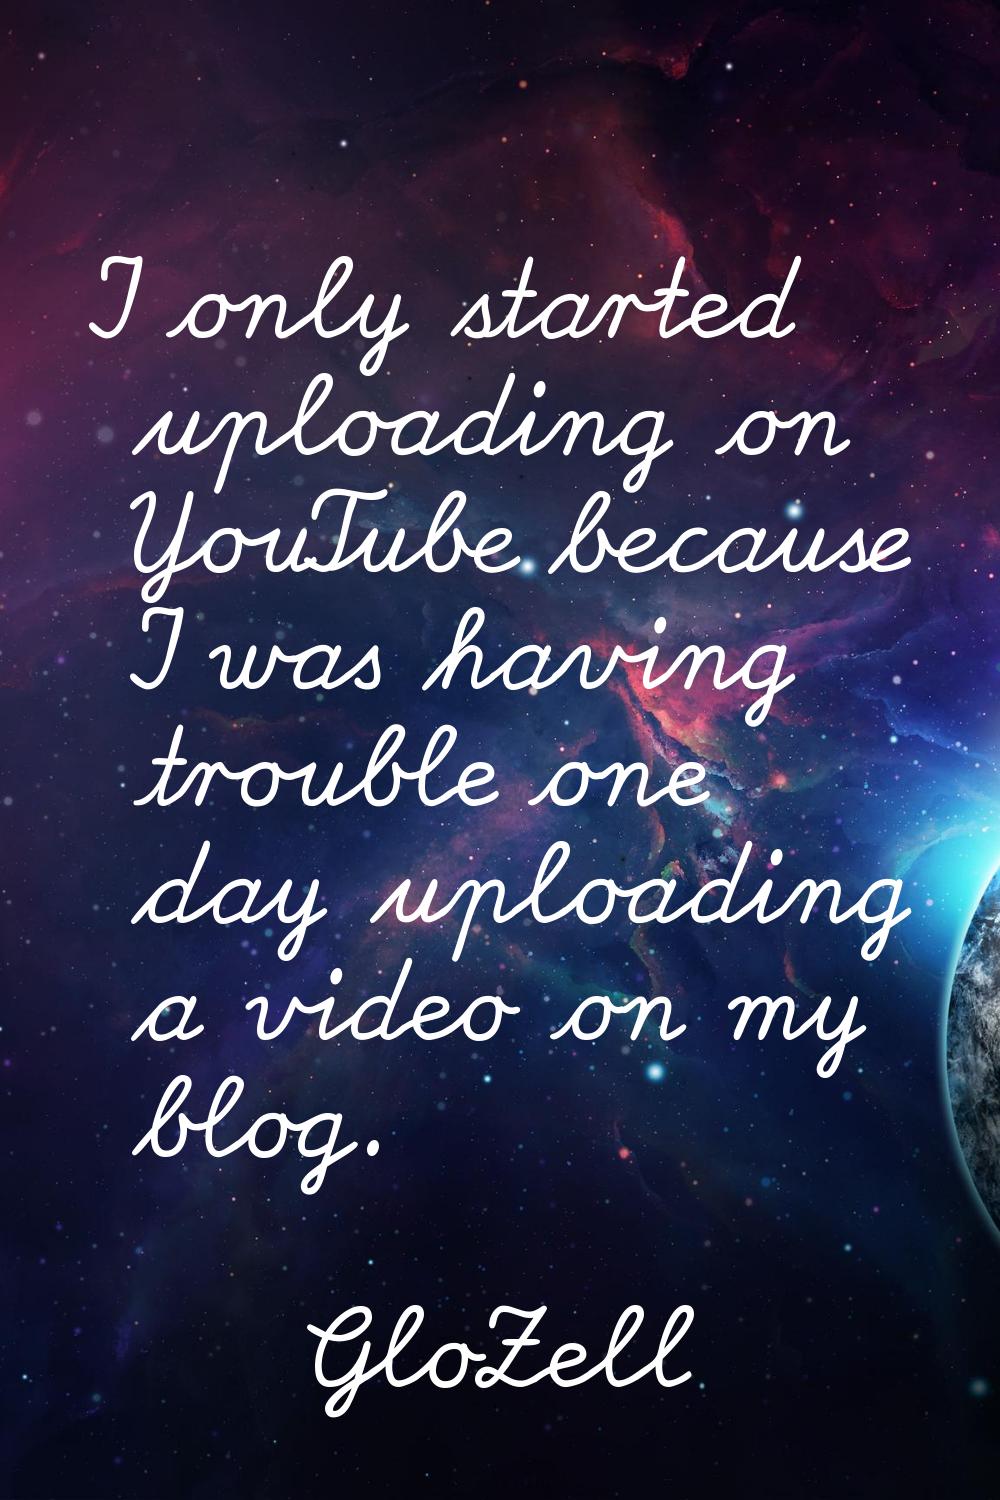 I only started uploading on YouTube because I was having trouble one day uploading a video on my bl